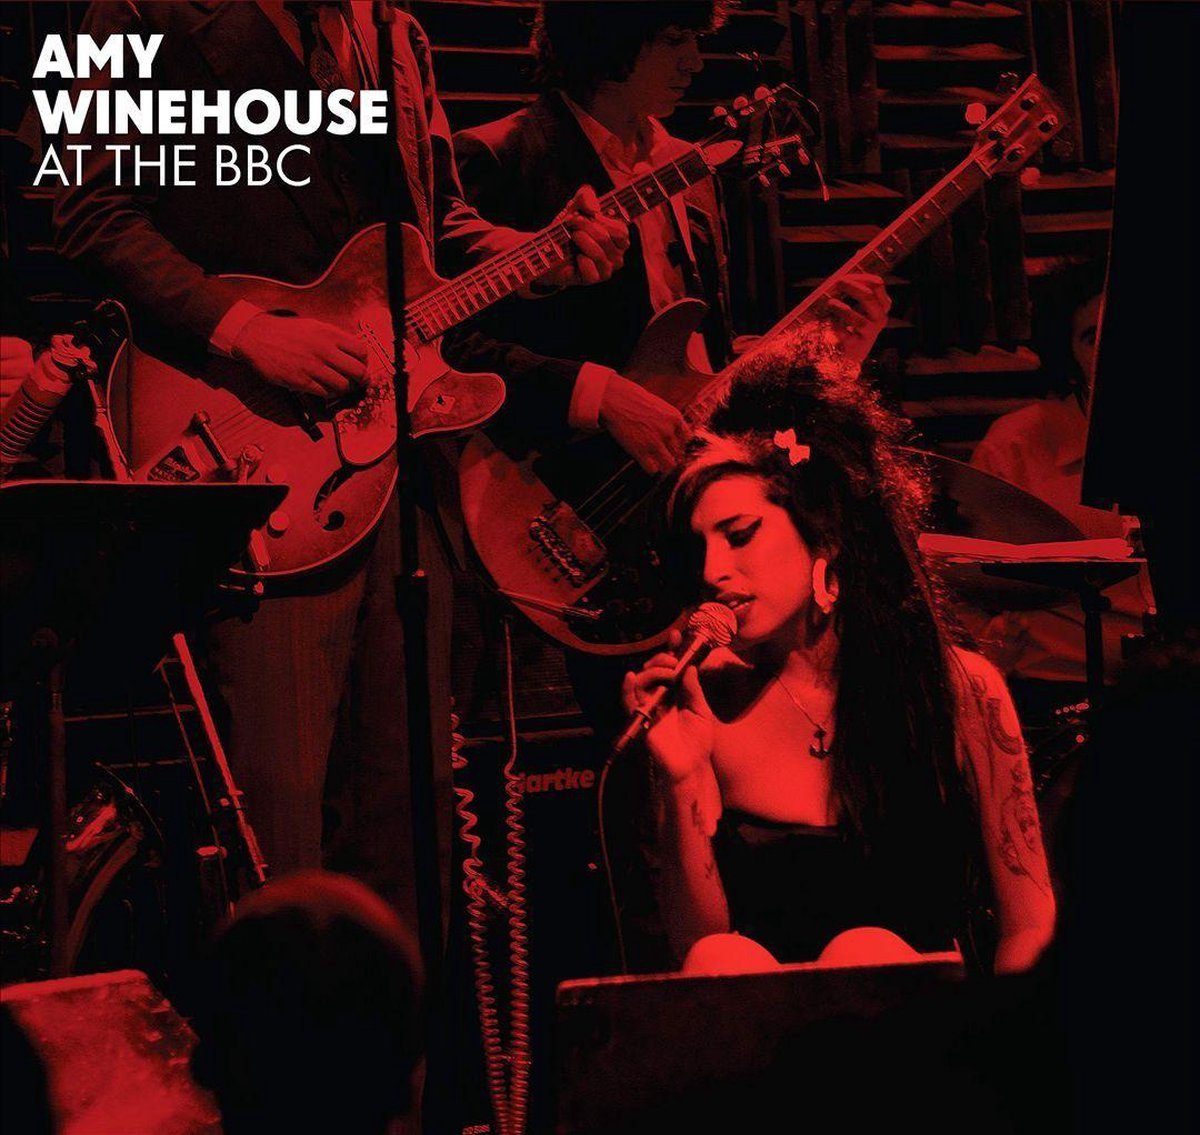 Universal Music Amy Winehouse At the BBC